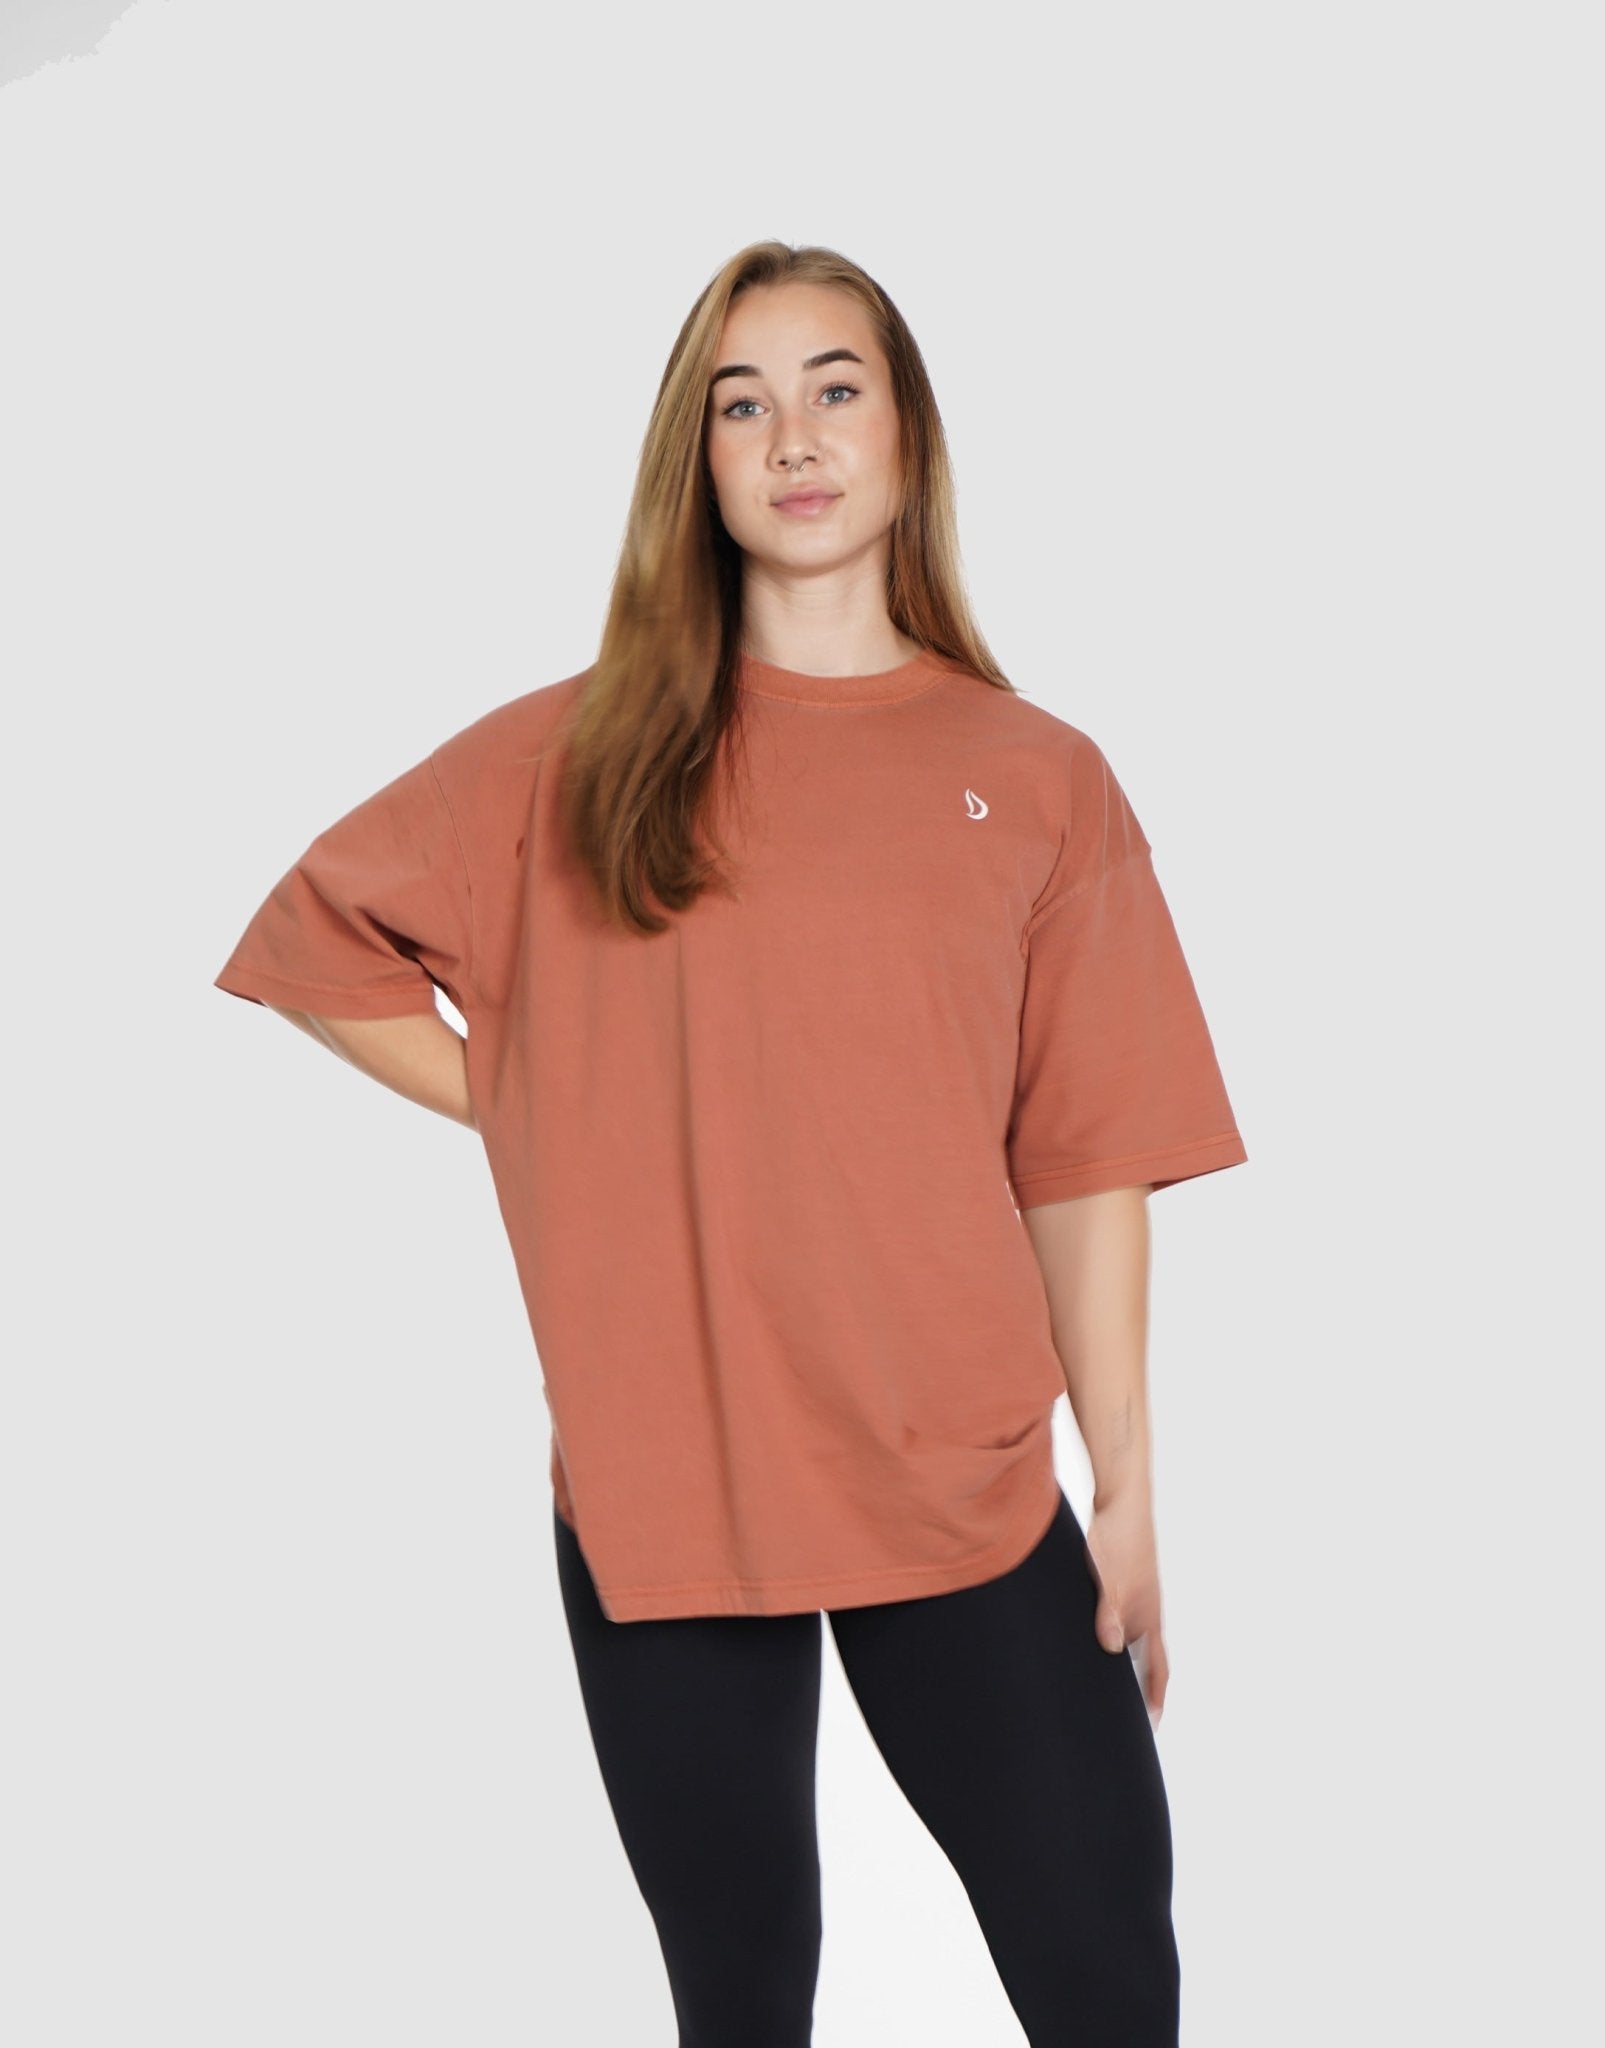 HSMQHJWE Comfy Clothes For Women Womens Oversized Tee Womens